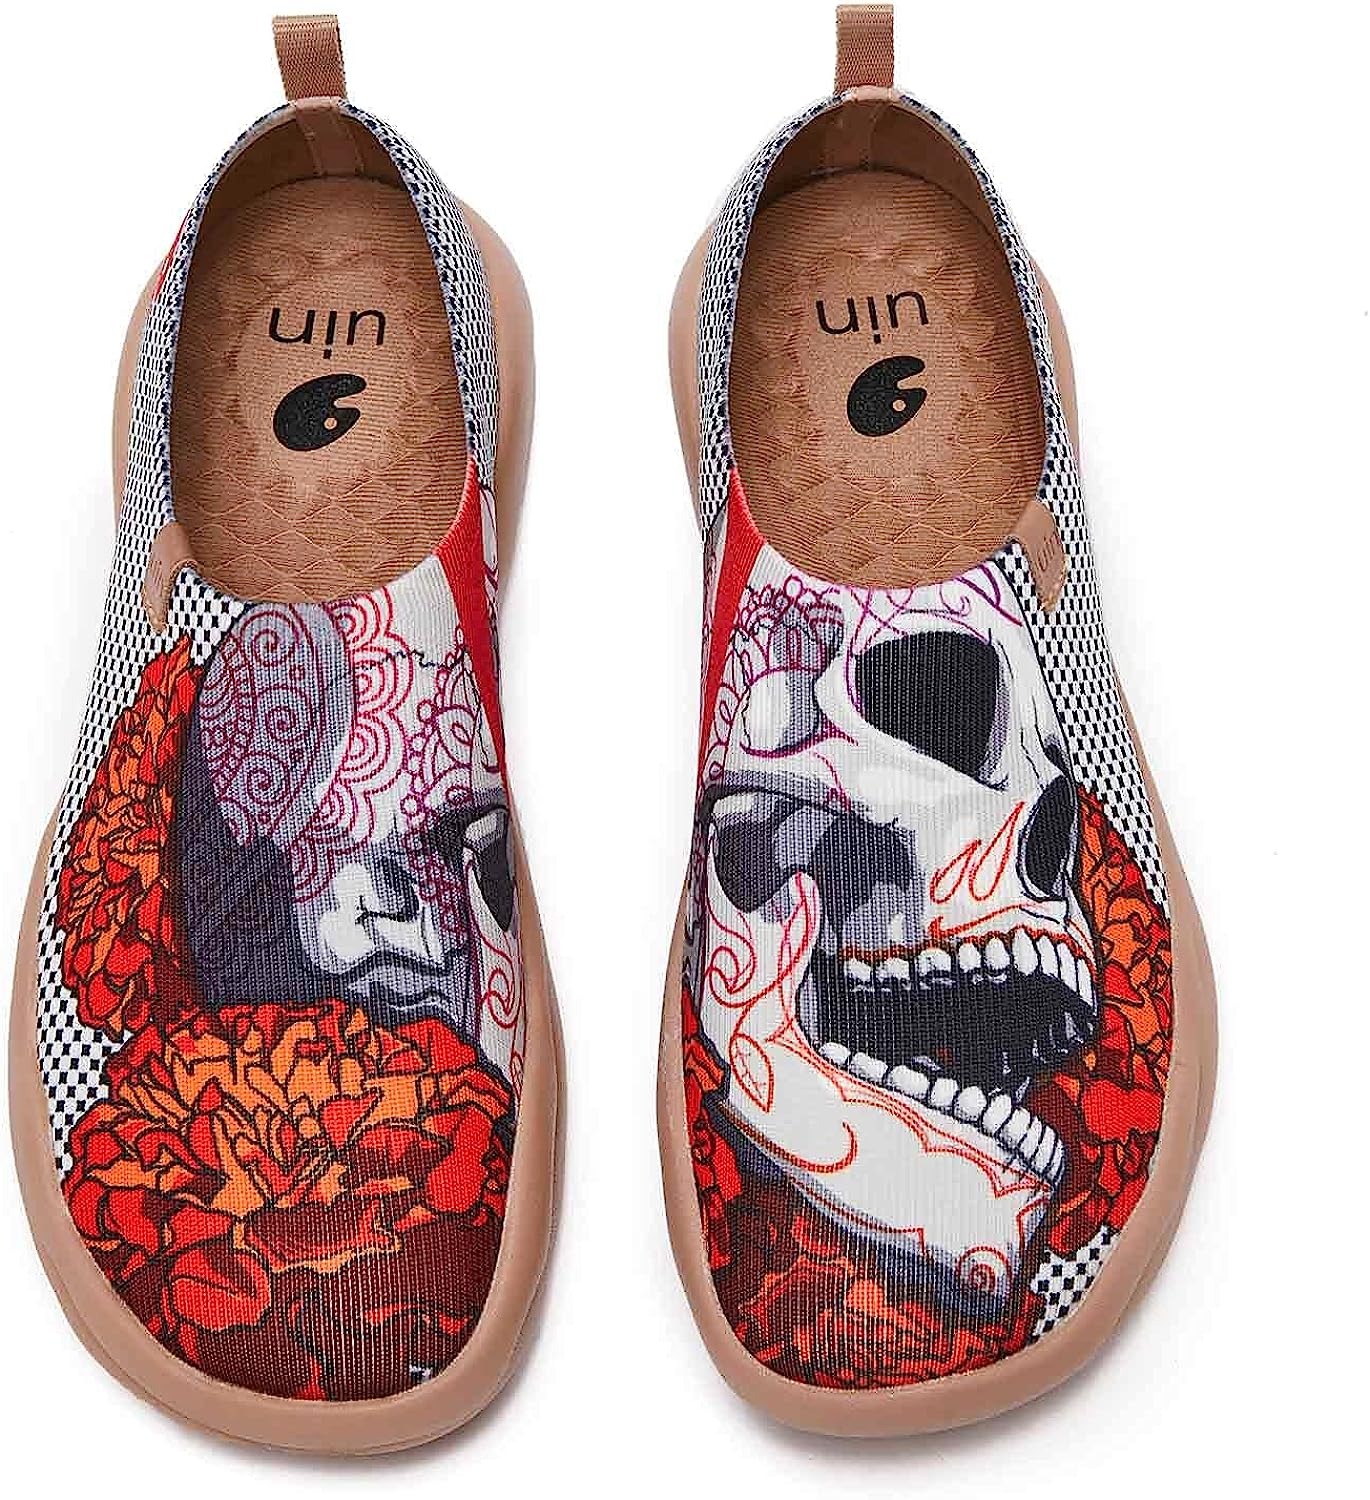 UIN Women's Art Painted Travel Shoes Slip On Casual [...]